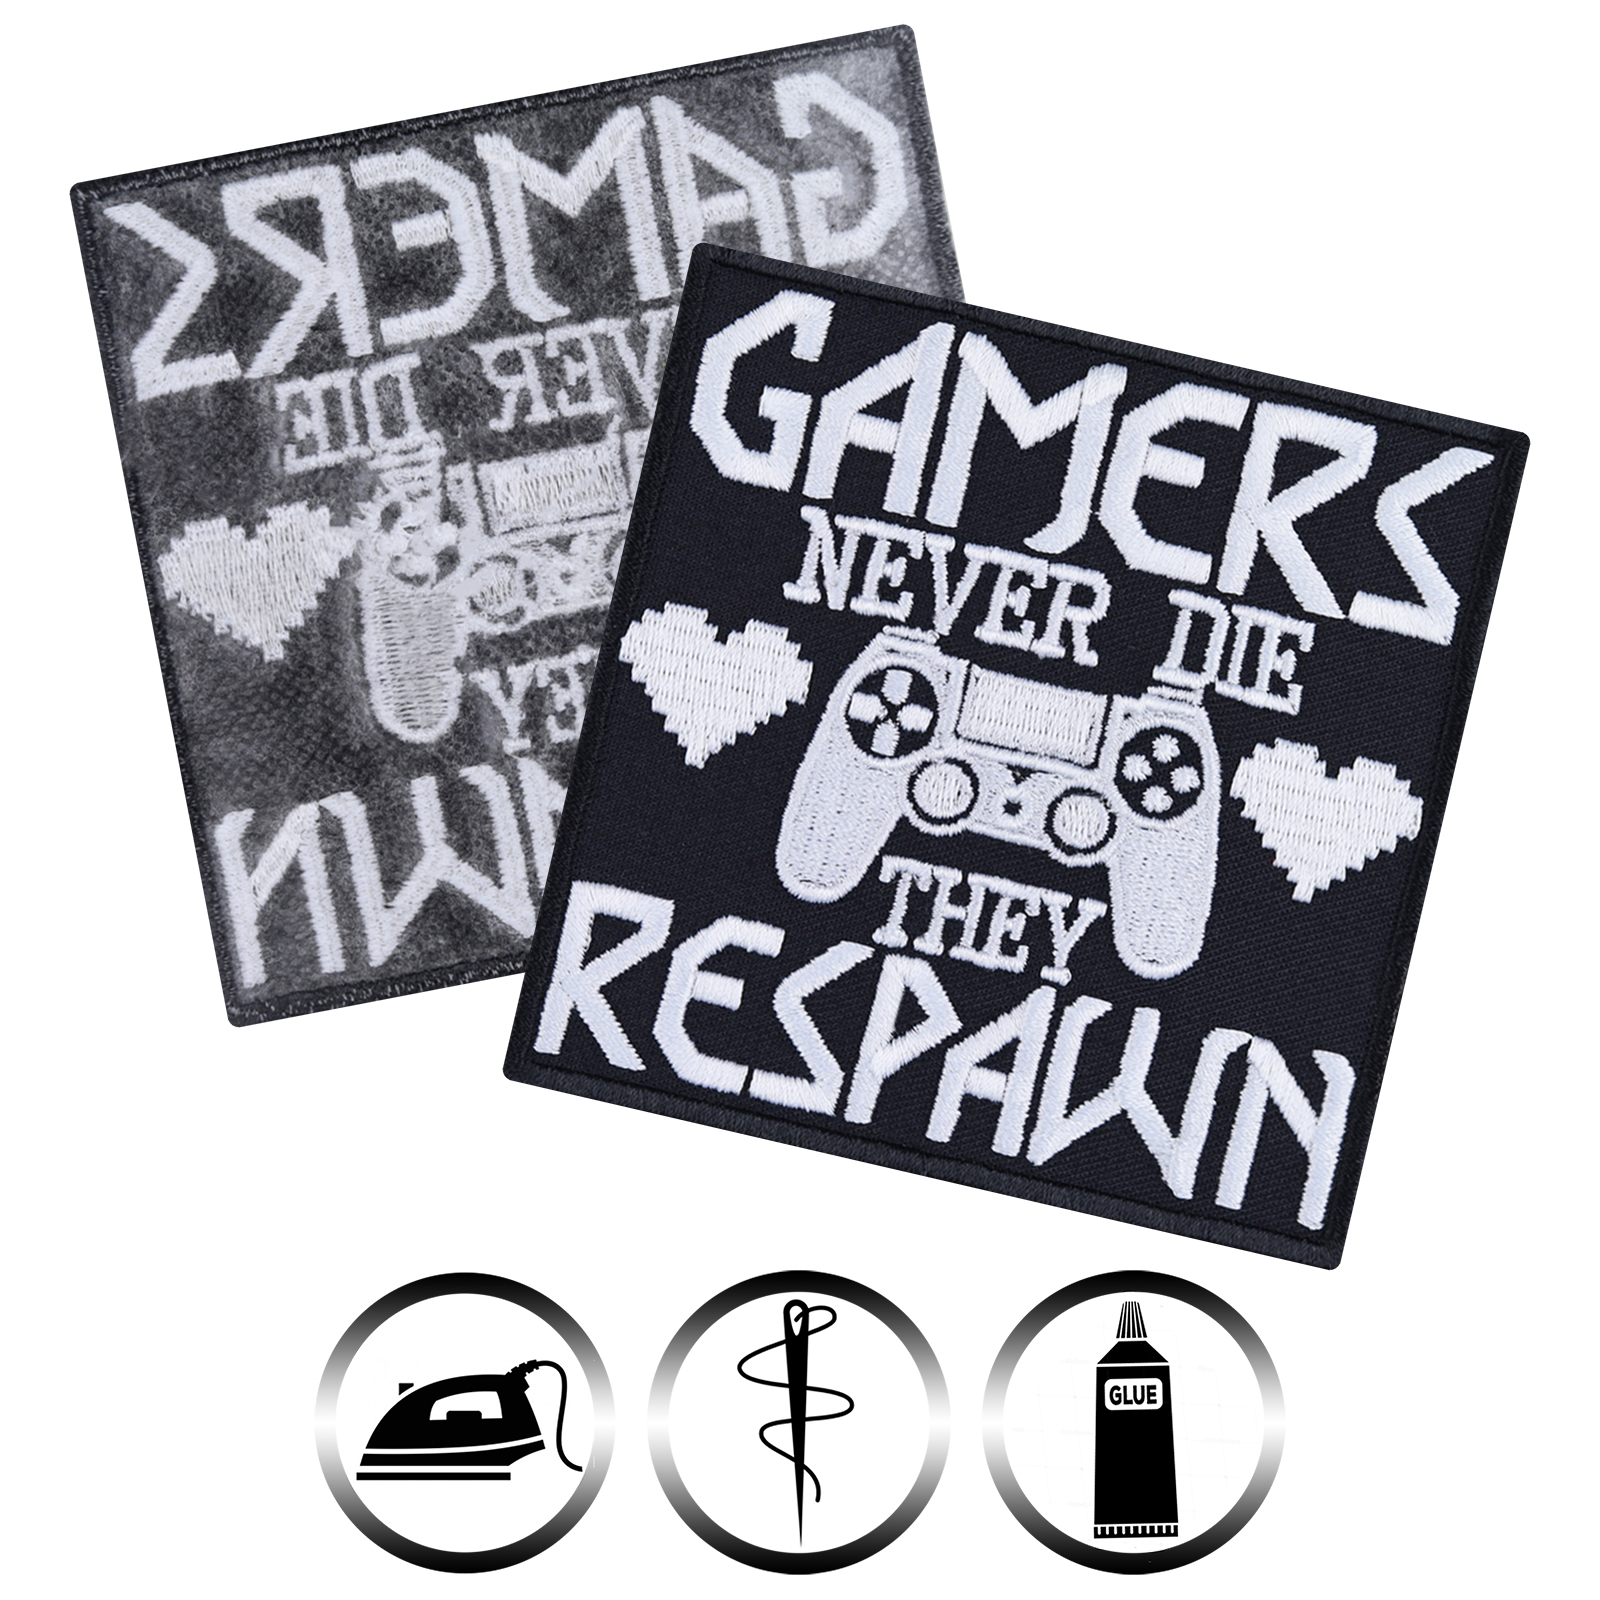 Gamers never die - they respawn - Patch